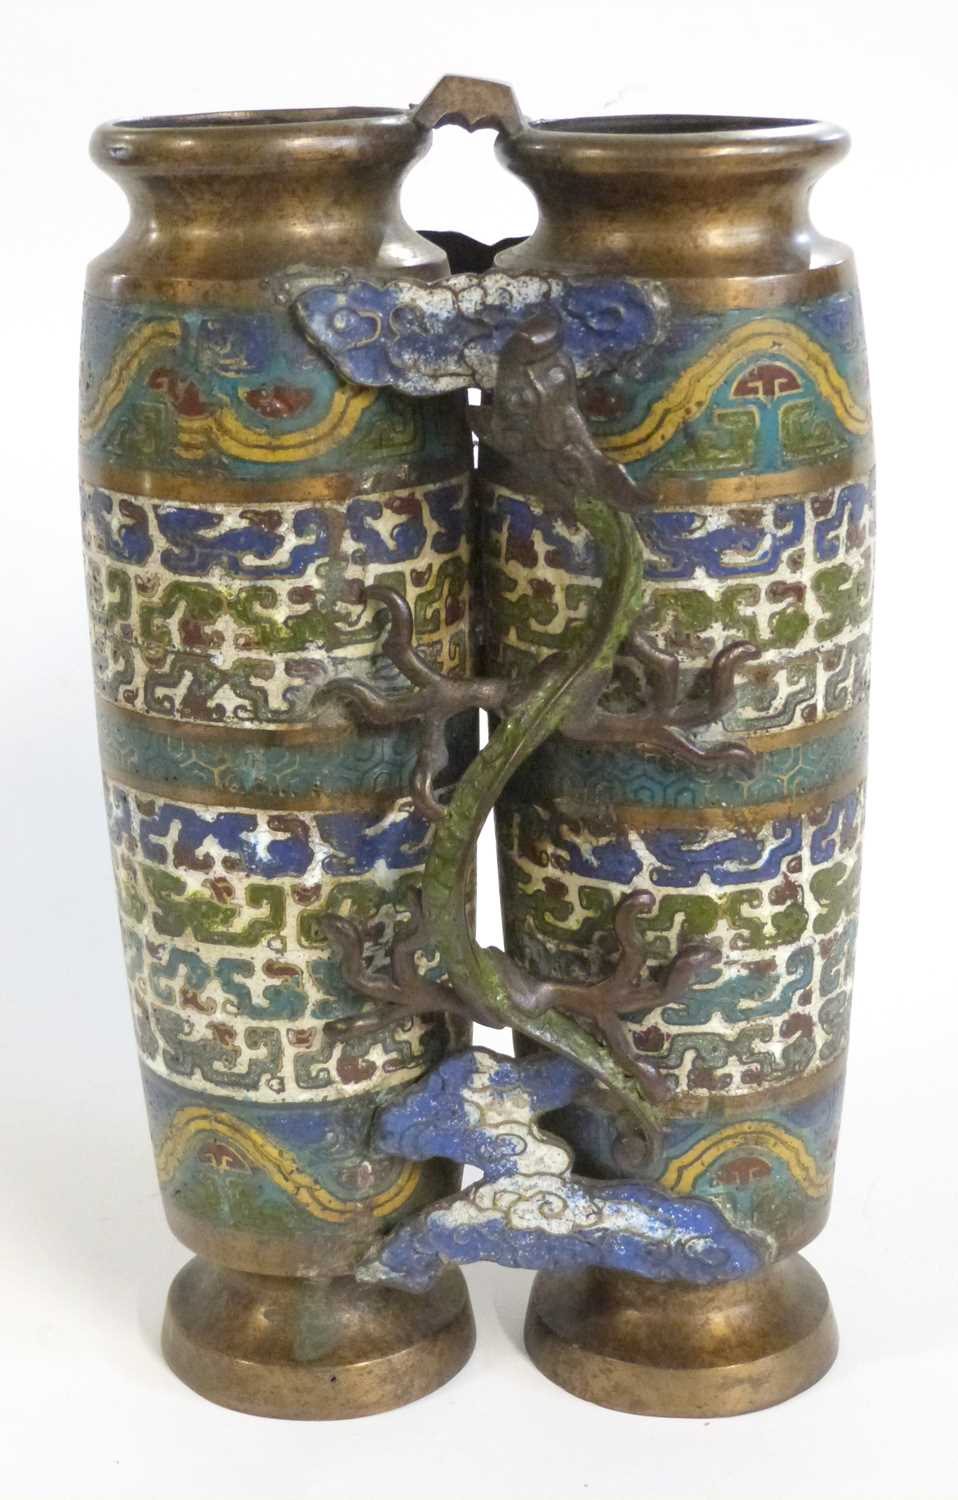 Pair of Chinese metal ware vases decorated in Ming Cloisonne style with banded decoration of - Image 2 of 9